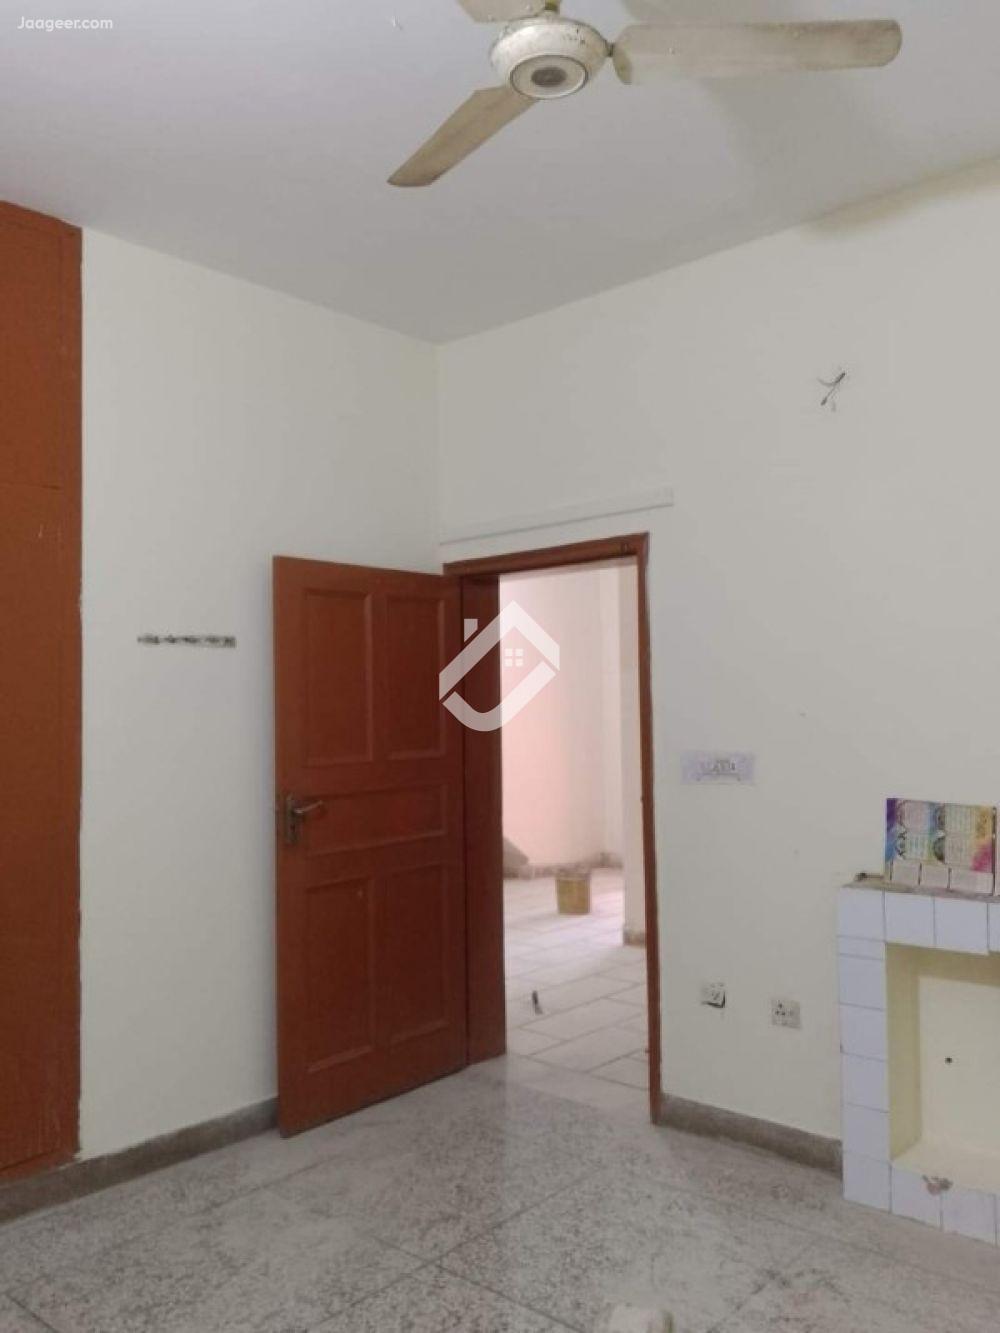 View  5 Marla Lower Portion House For Rent In Faisal Colony in Faisal Colony, Islamabad